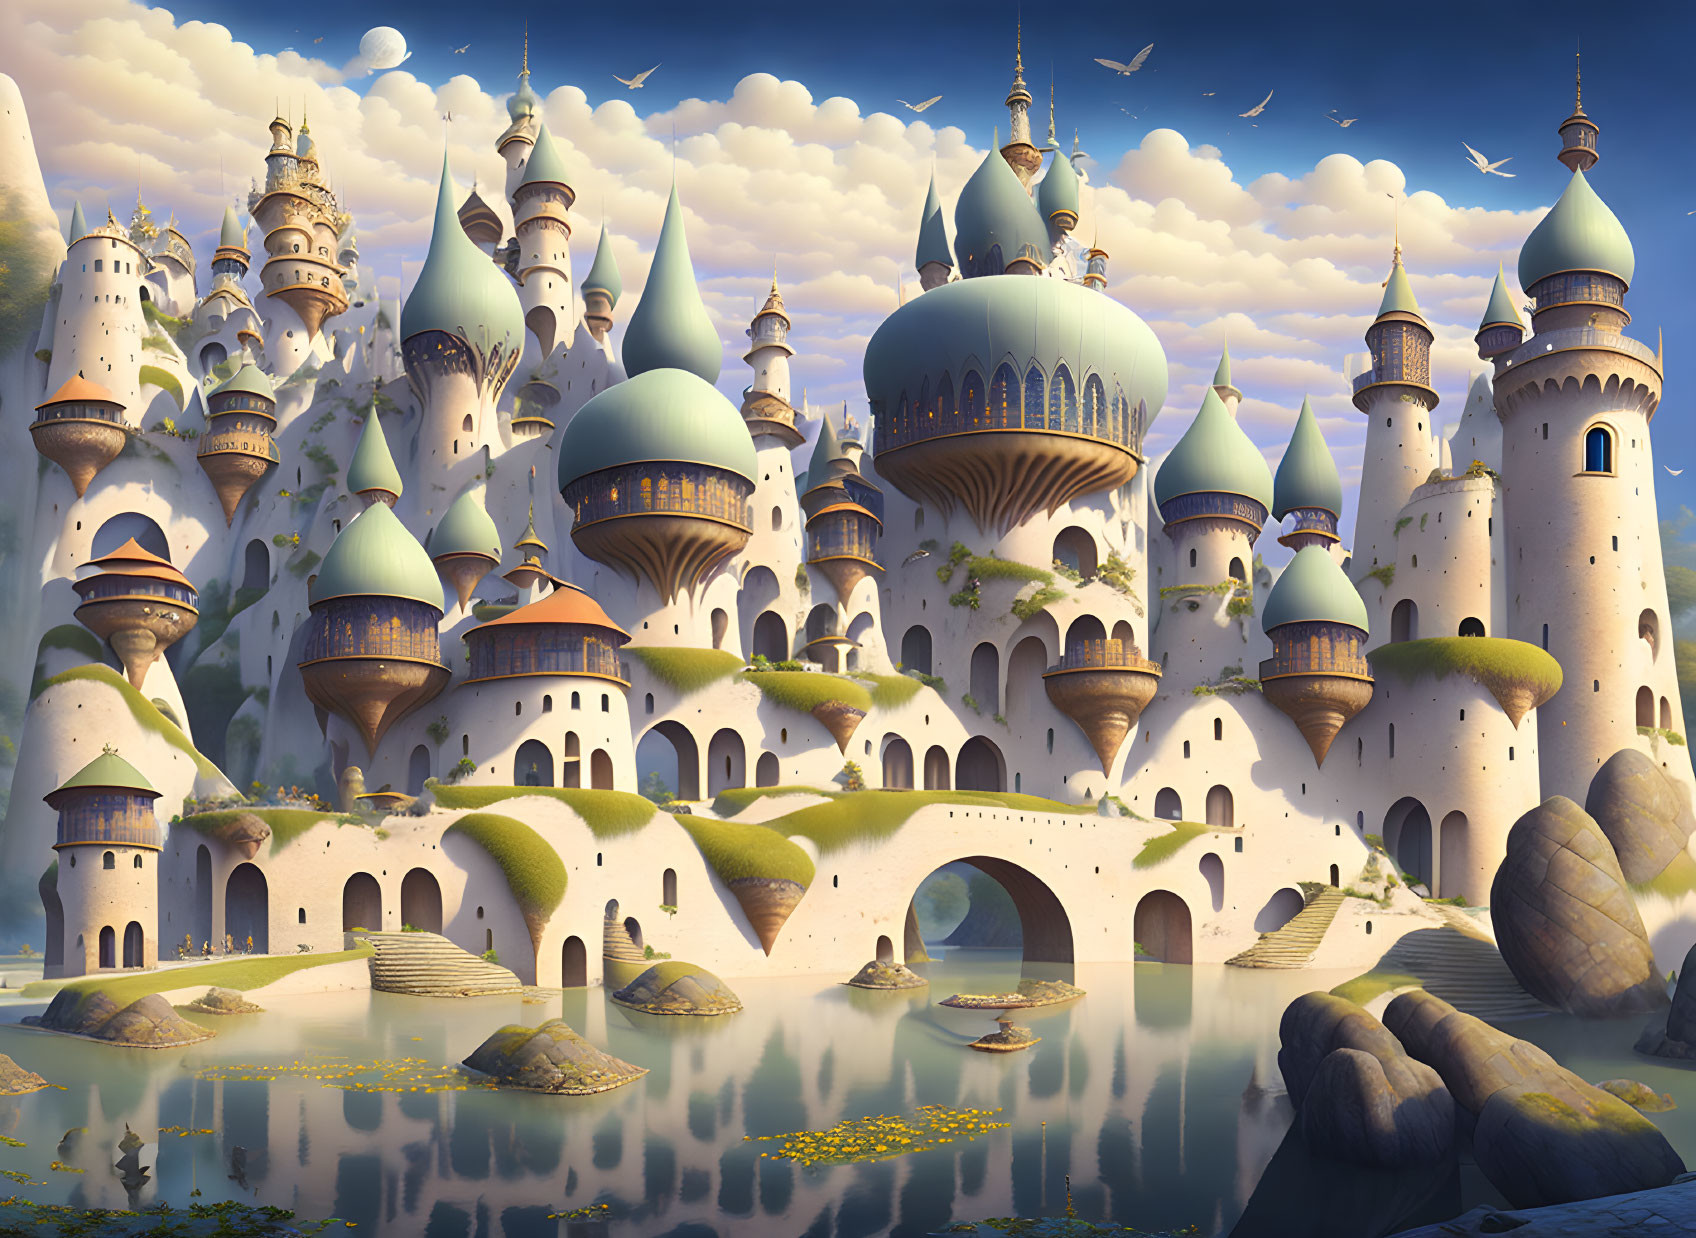 Fantasy castle with towers, bridges, and turquoise domes in serene landscape